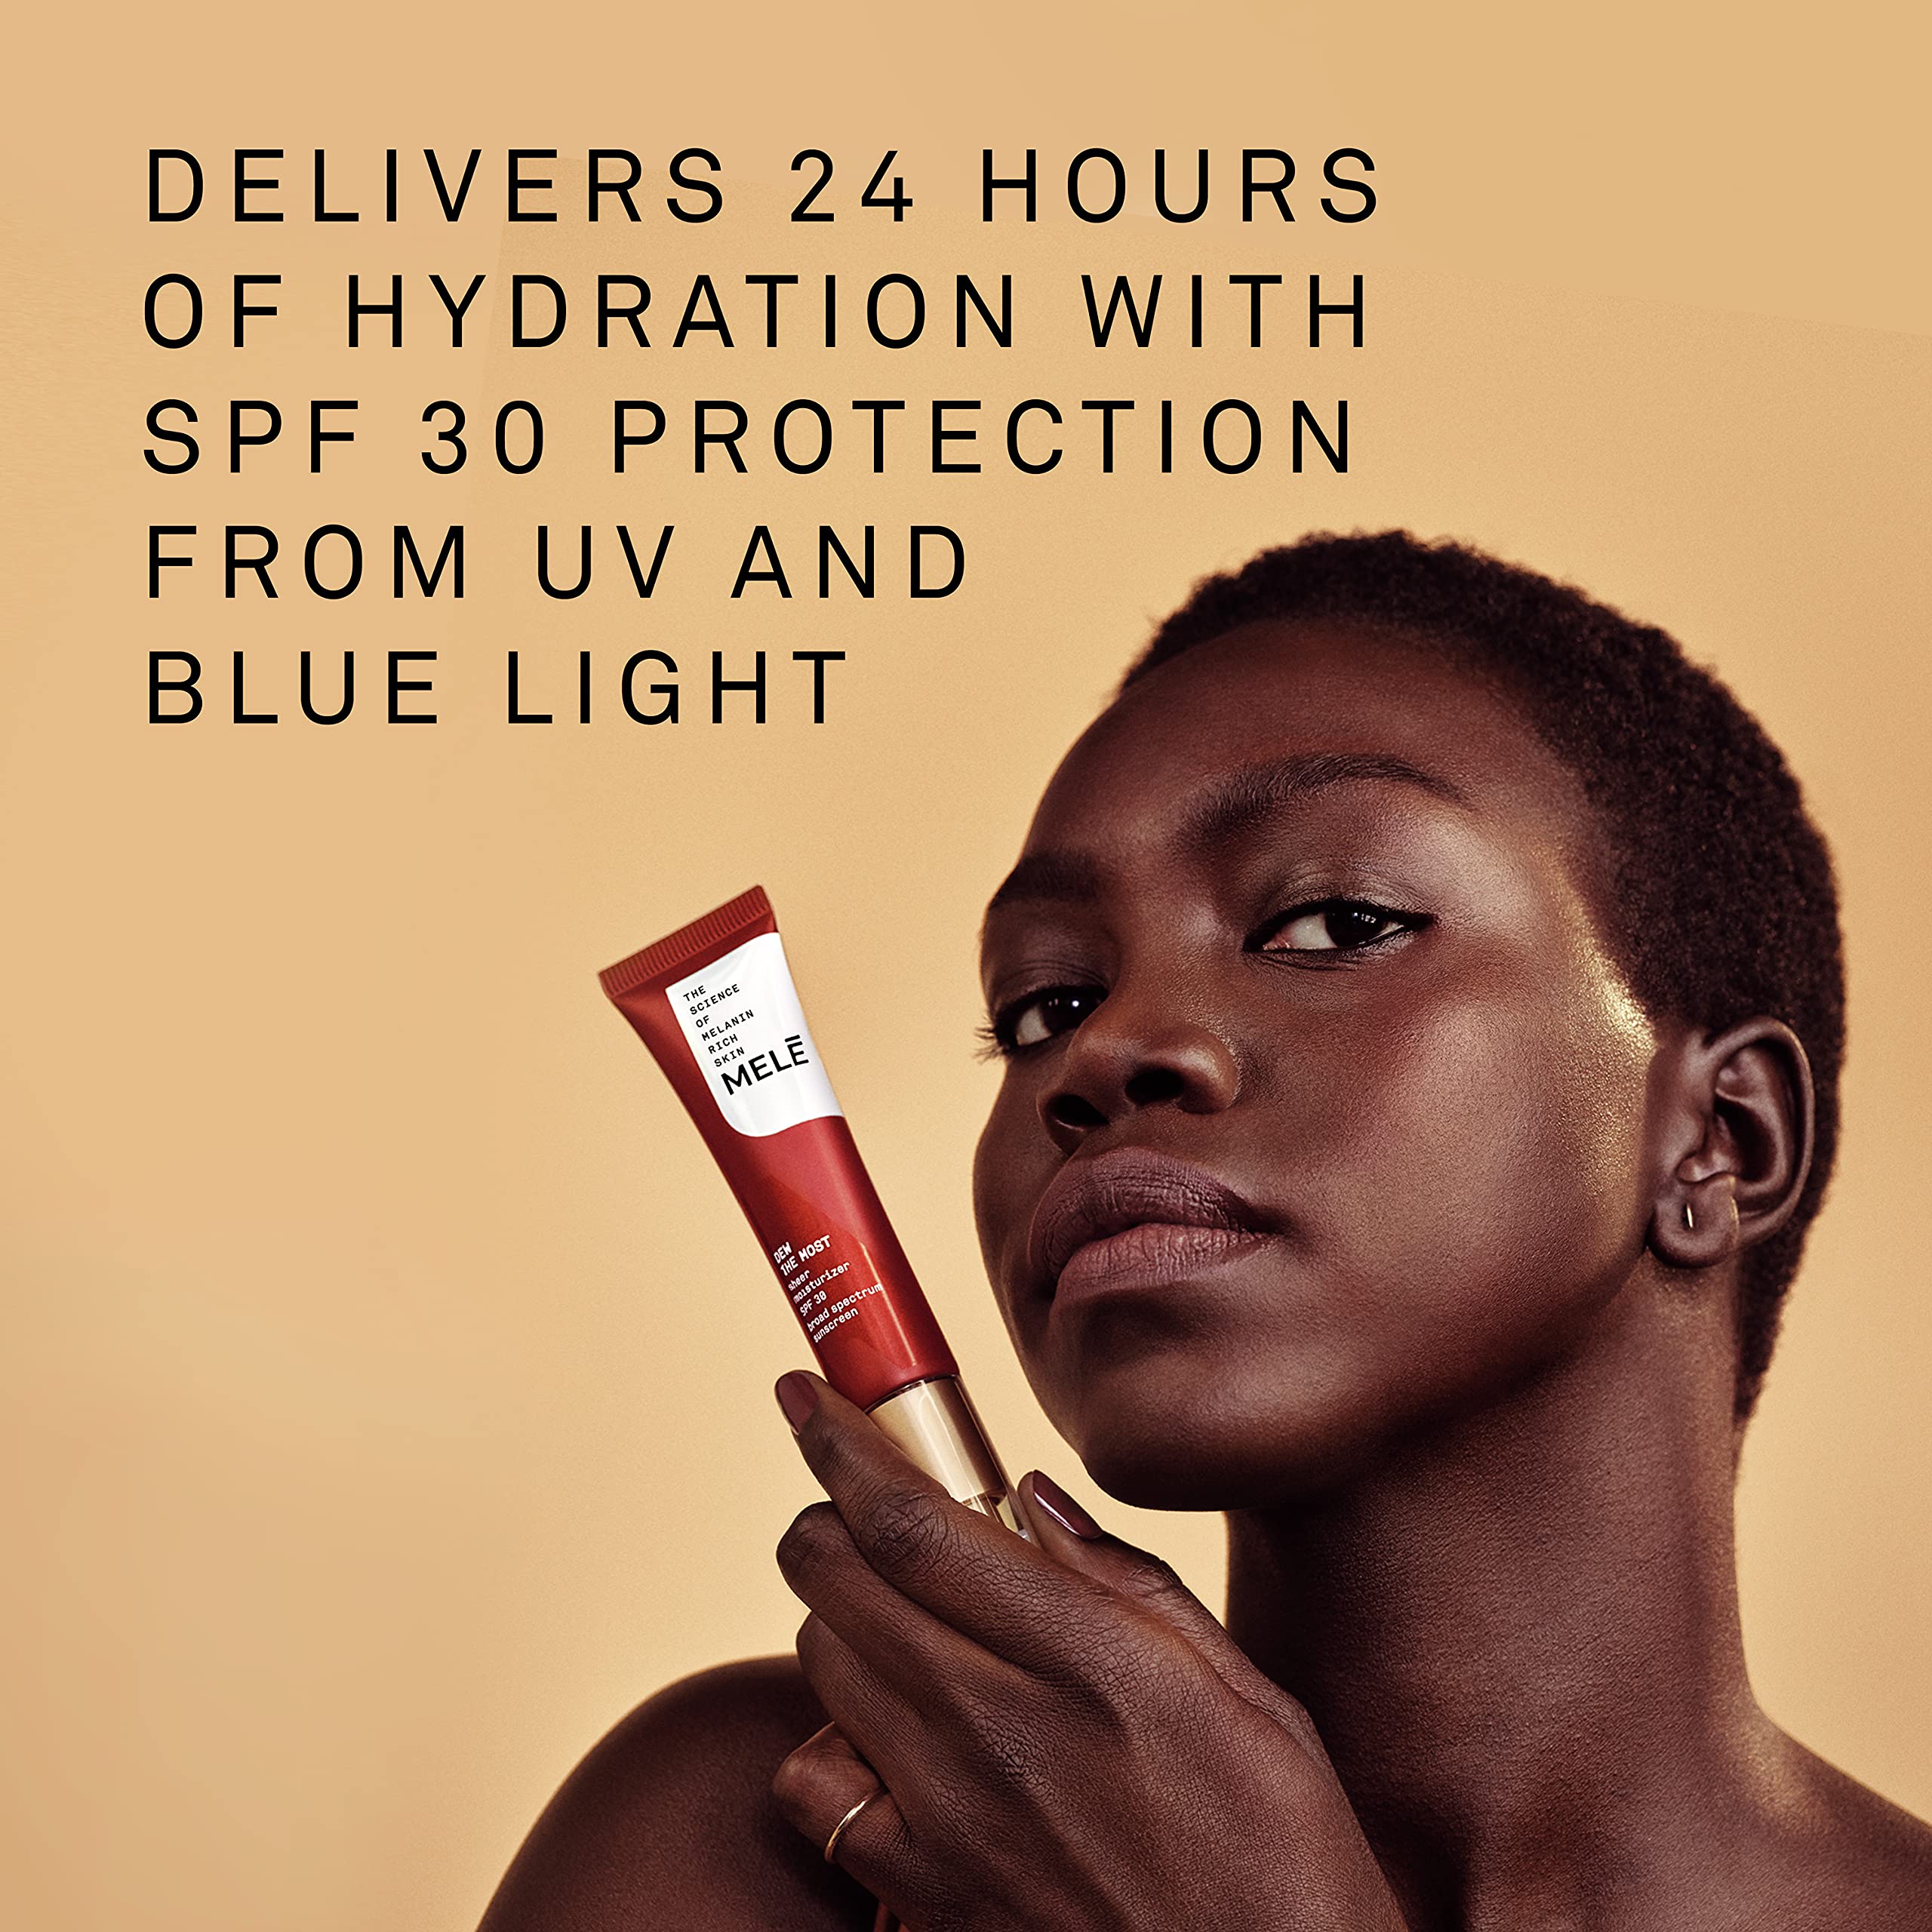 MELE Face Moisturizer 24 Hours Of Broad Spectrum Protection From UVA, UVB And Blue Light Moisturizer With SPF Dew The Most SPF 30 With Niacinamide And Vitamin E 1 oz, White